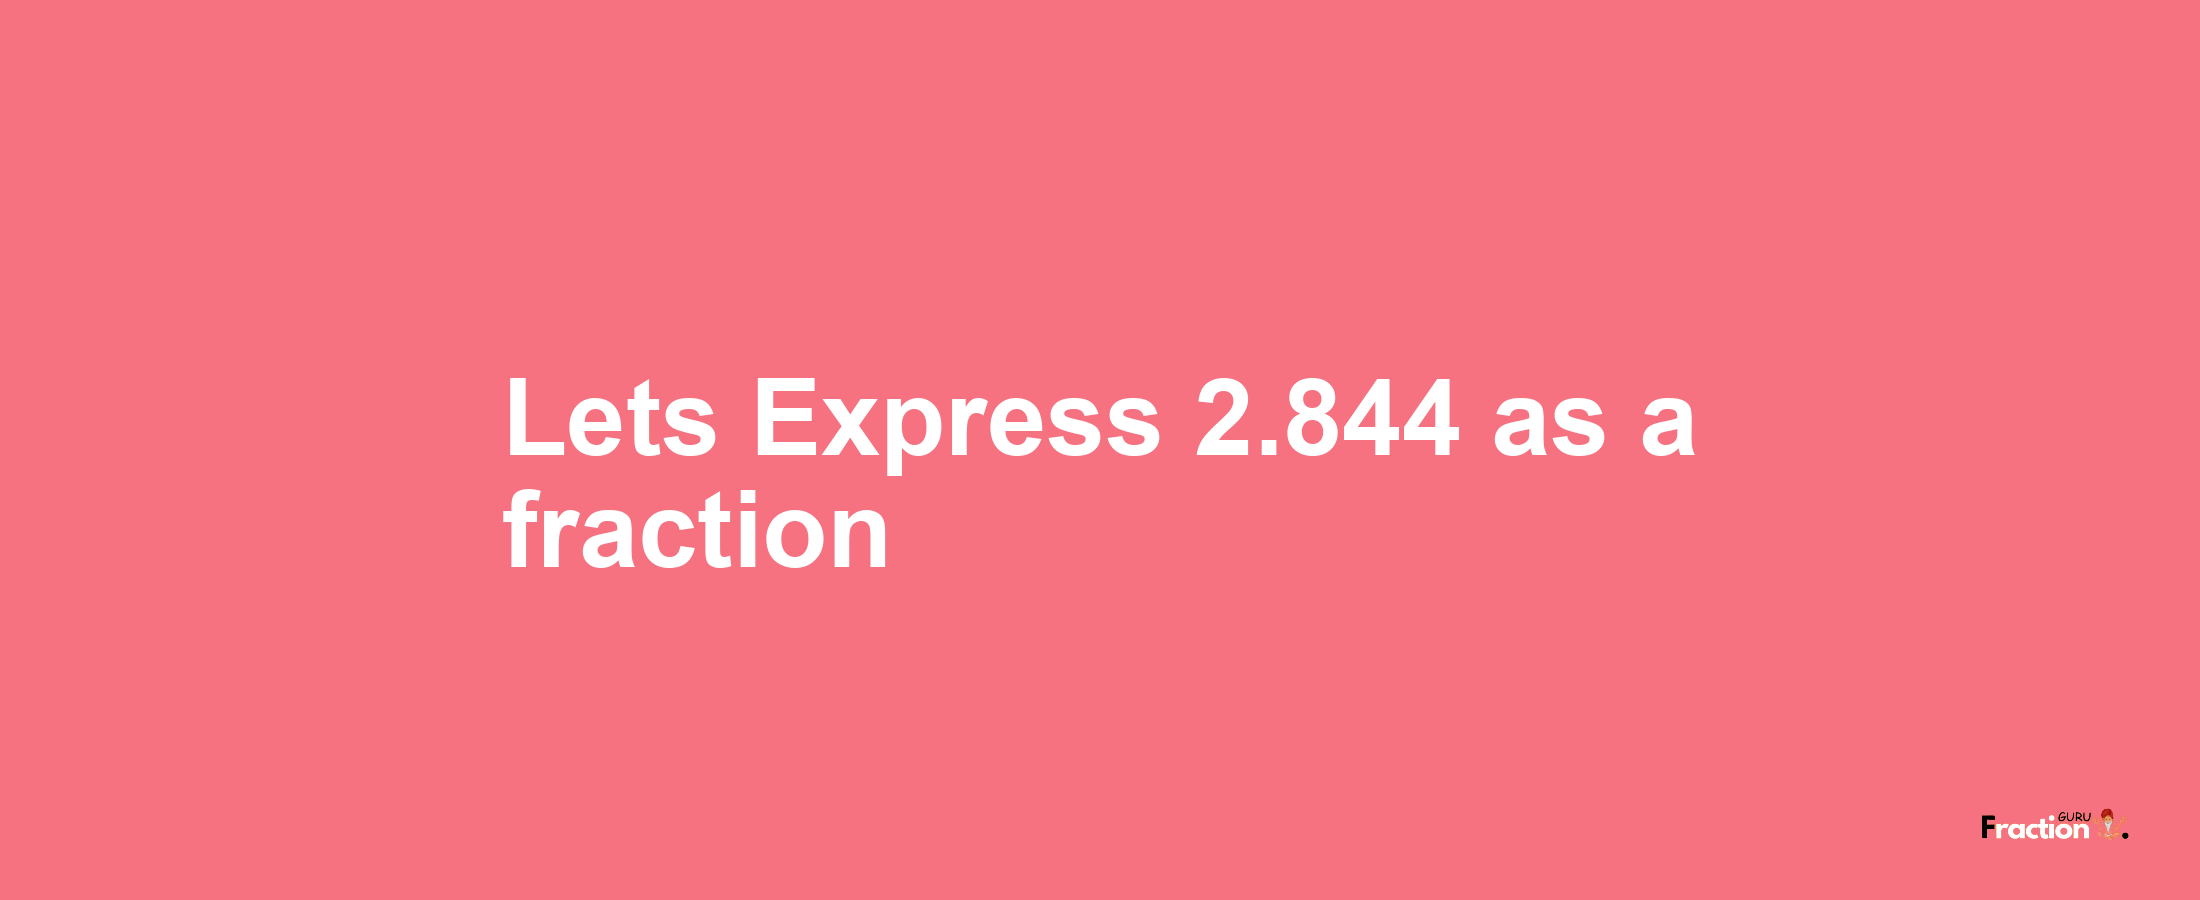 Lets Express 2.844 as afraction